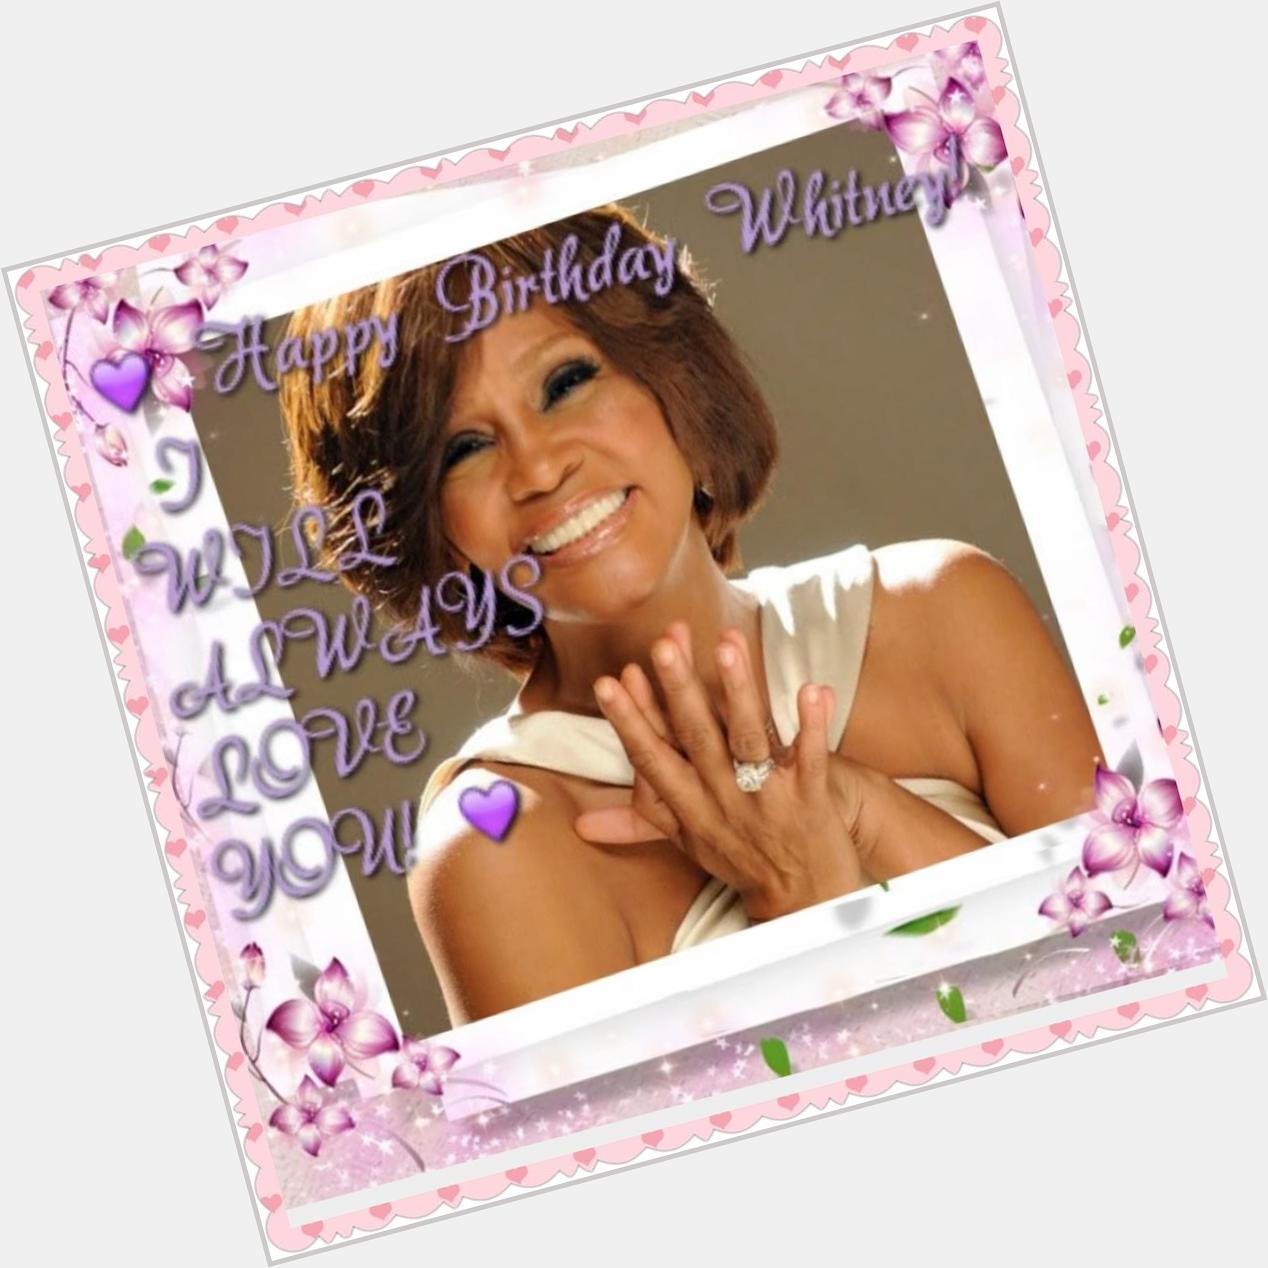 Happy Birthday Whitney Houston ! The world and I miss you so much .  